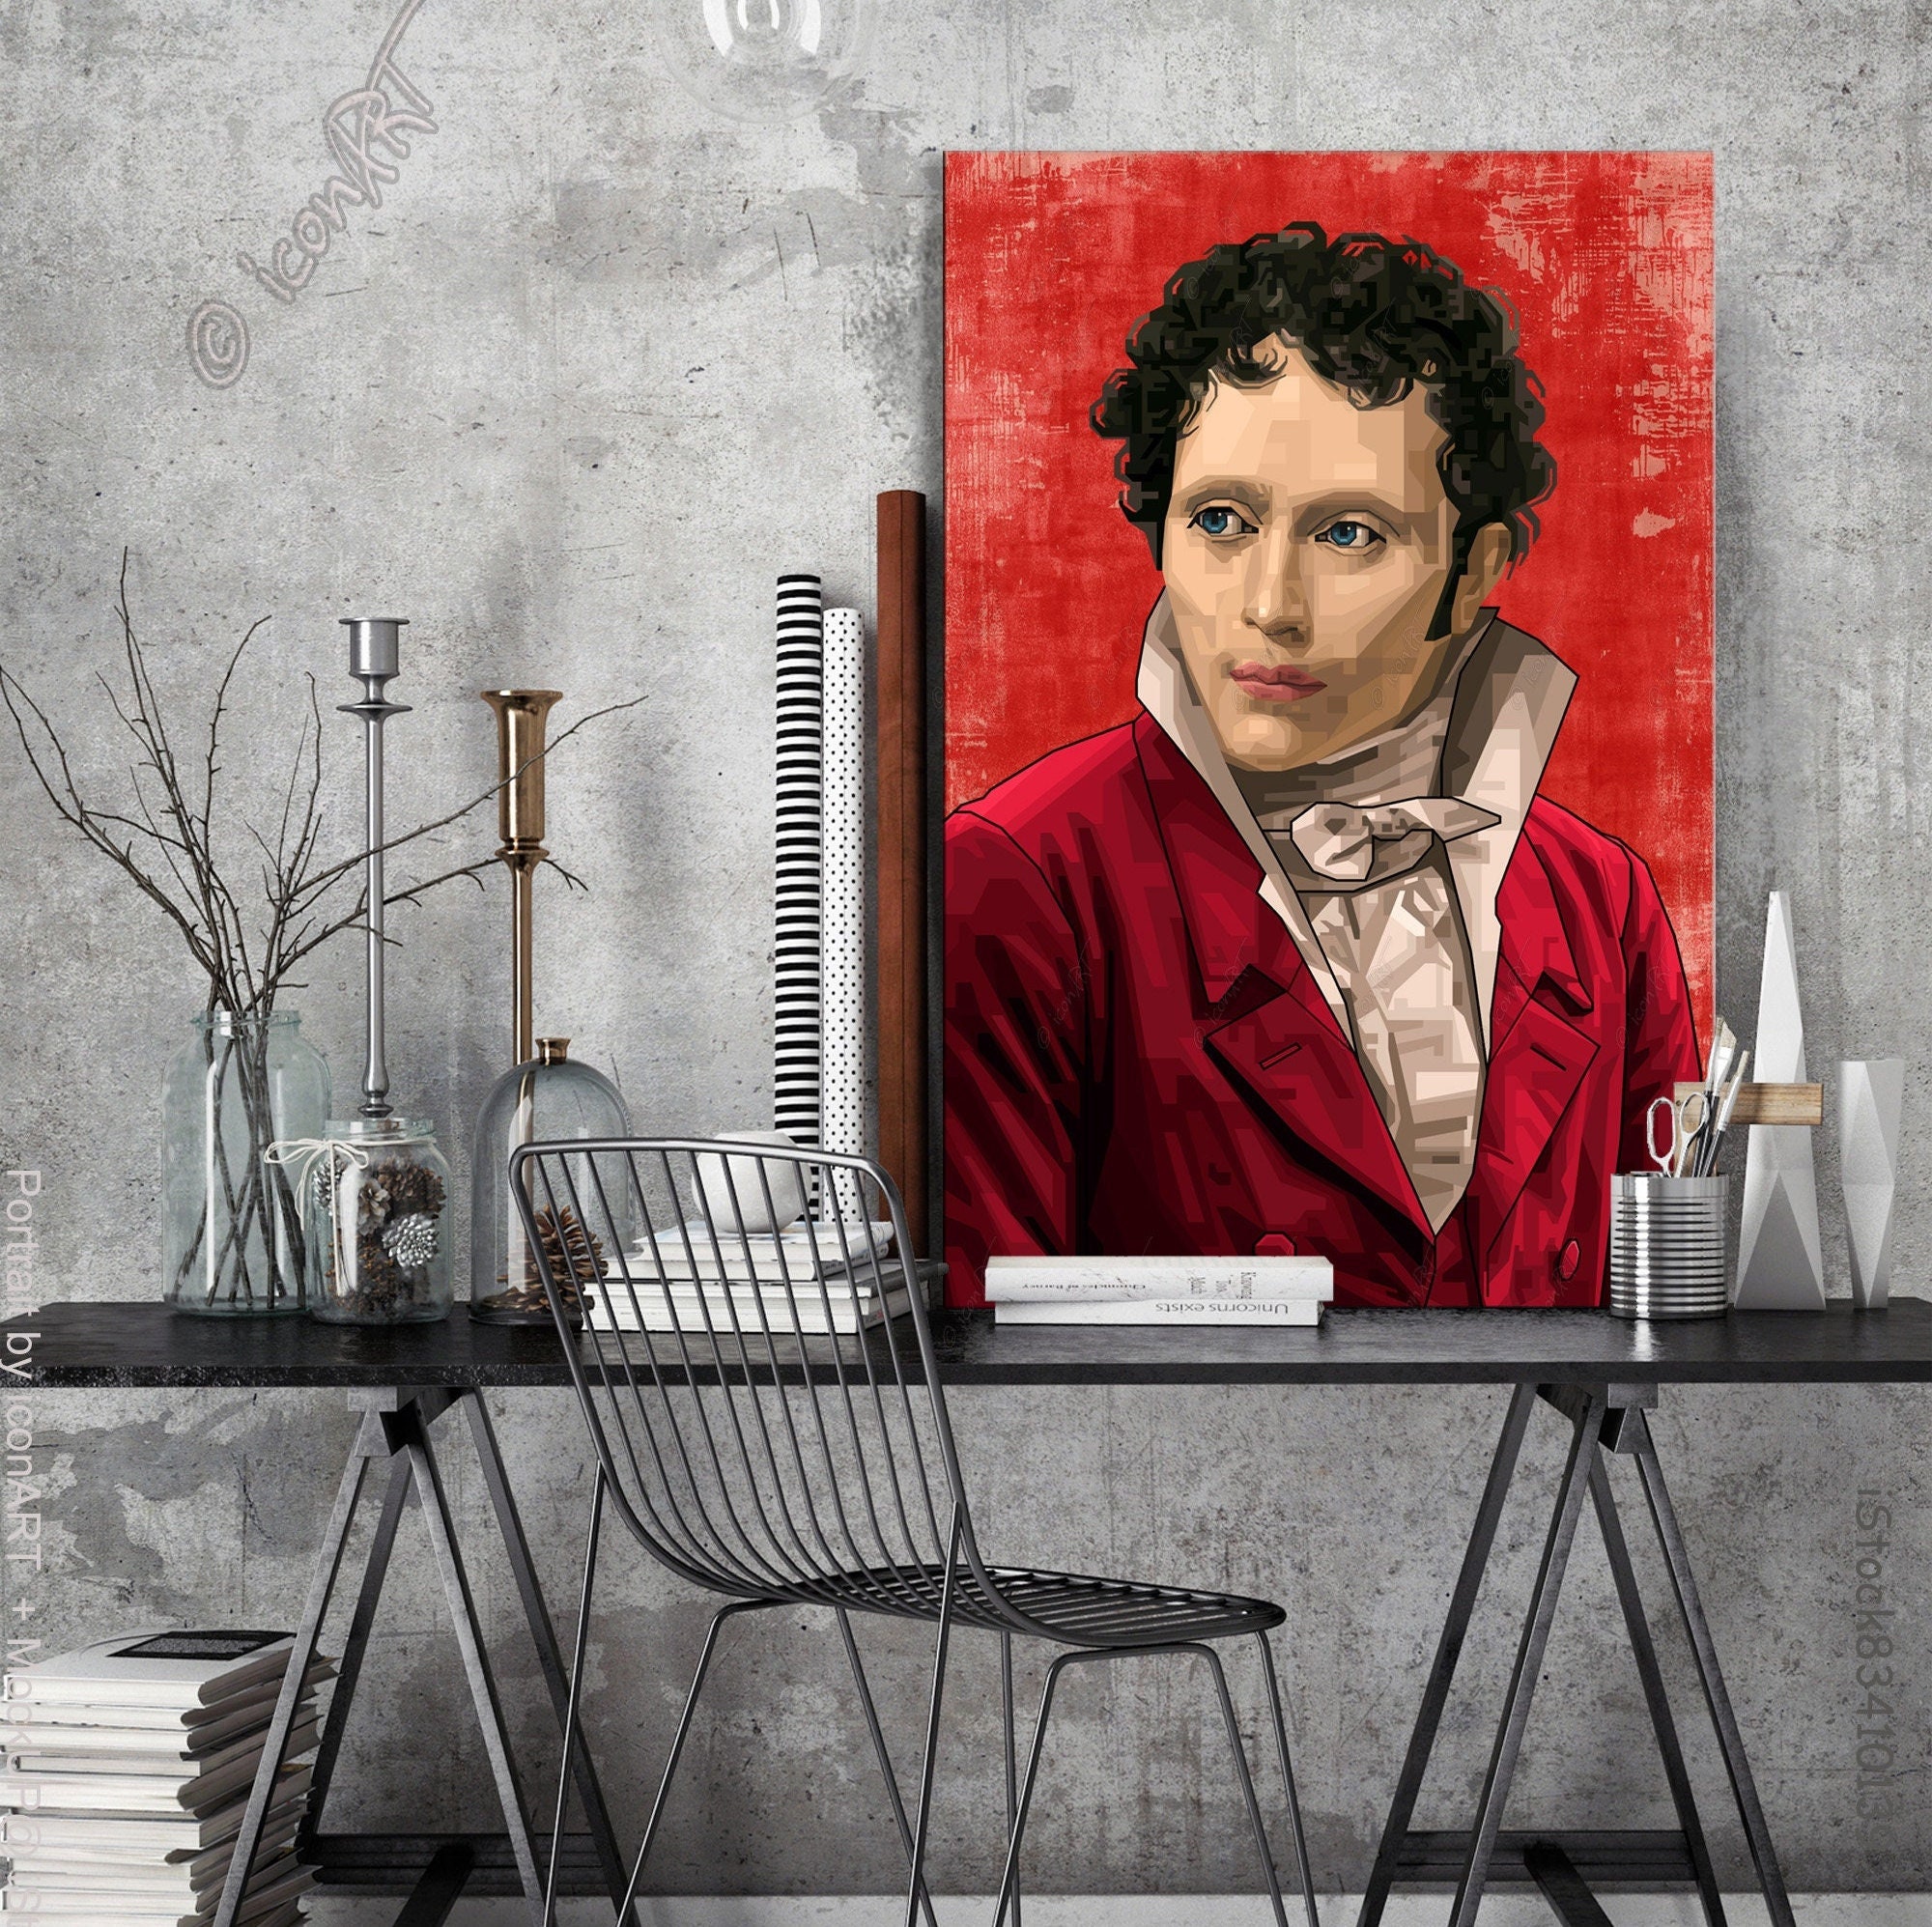 Living Arthur Art - Pictures Room Art as Office, Canvas Pop for cozy, Worldly Schopenhauer Digital Blanket on Business Art or & Culture Etsy